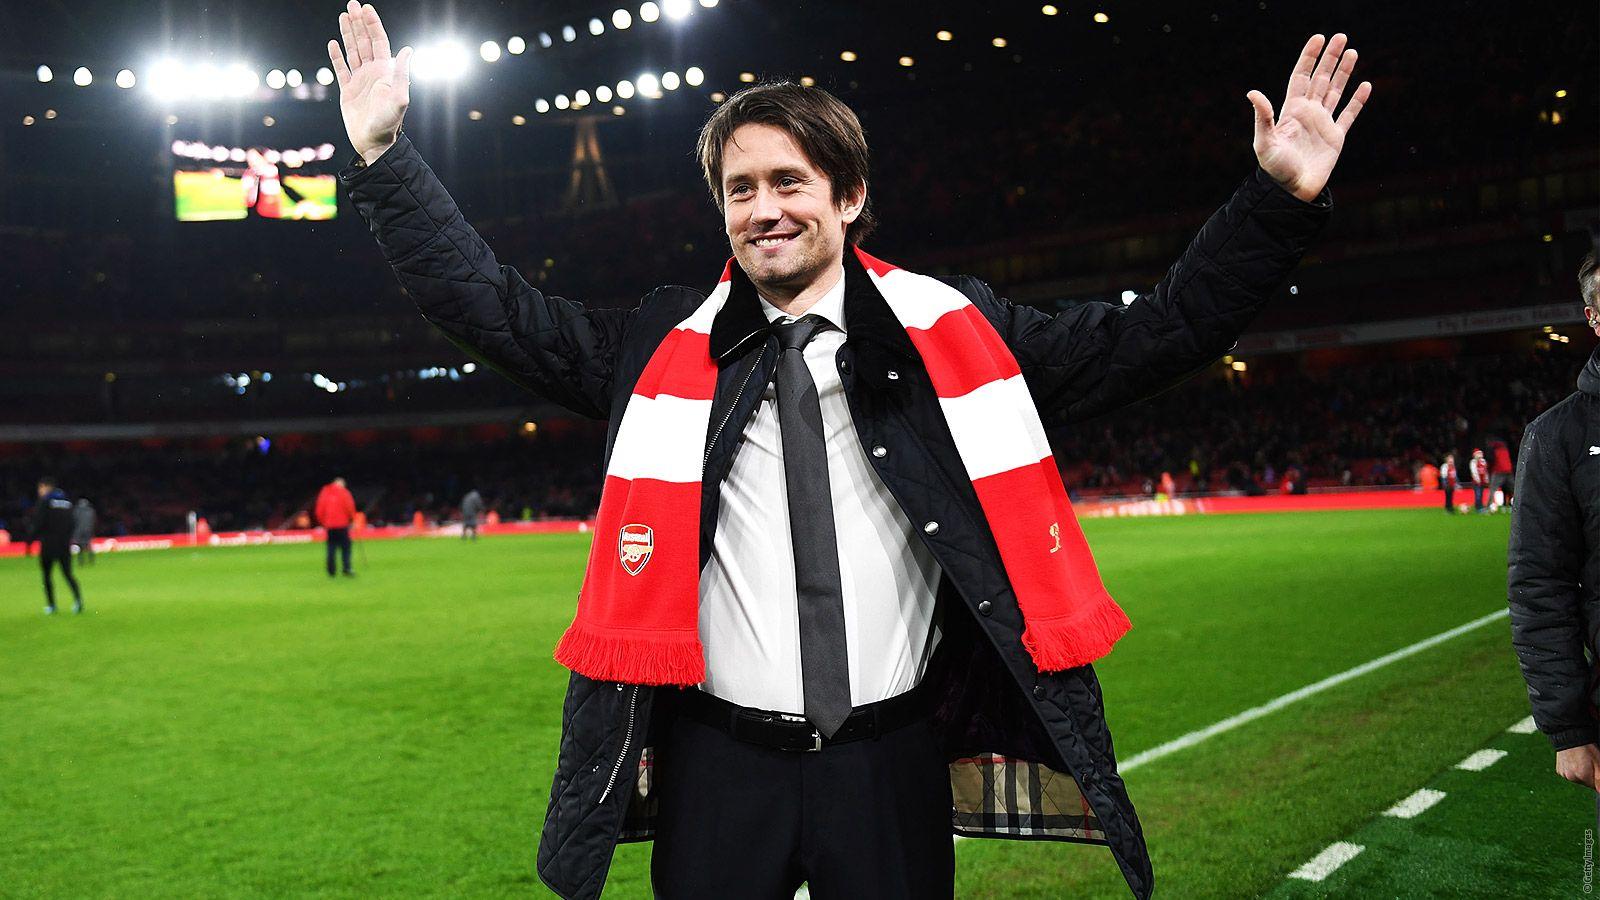 Rosicky inducted into The 100 Club